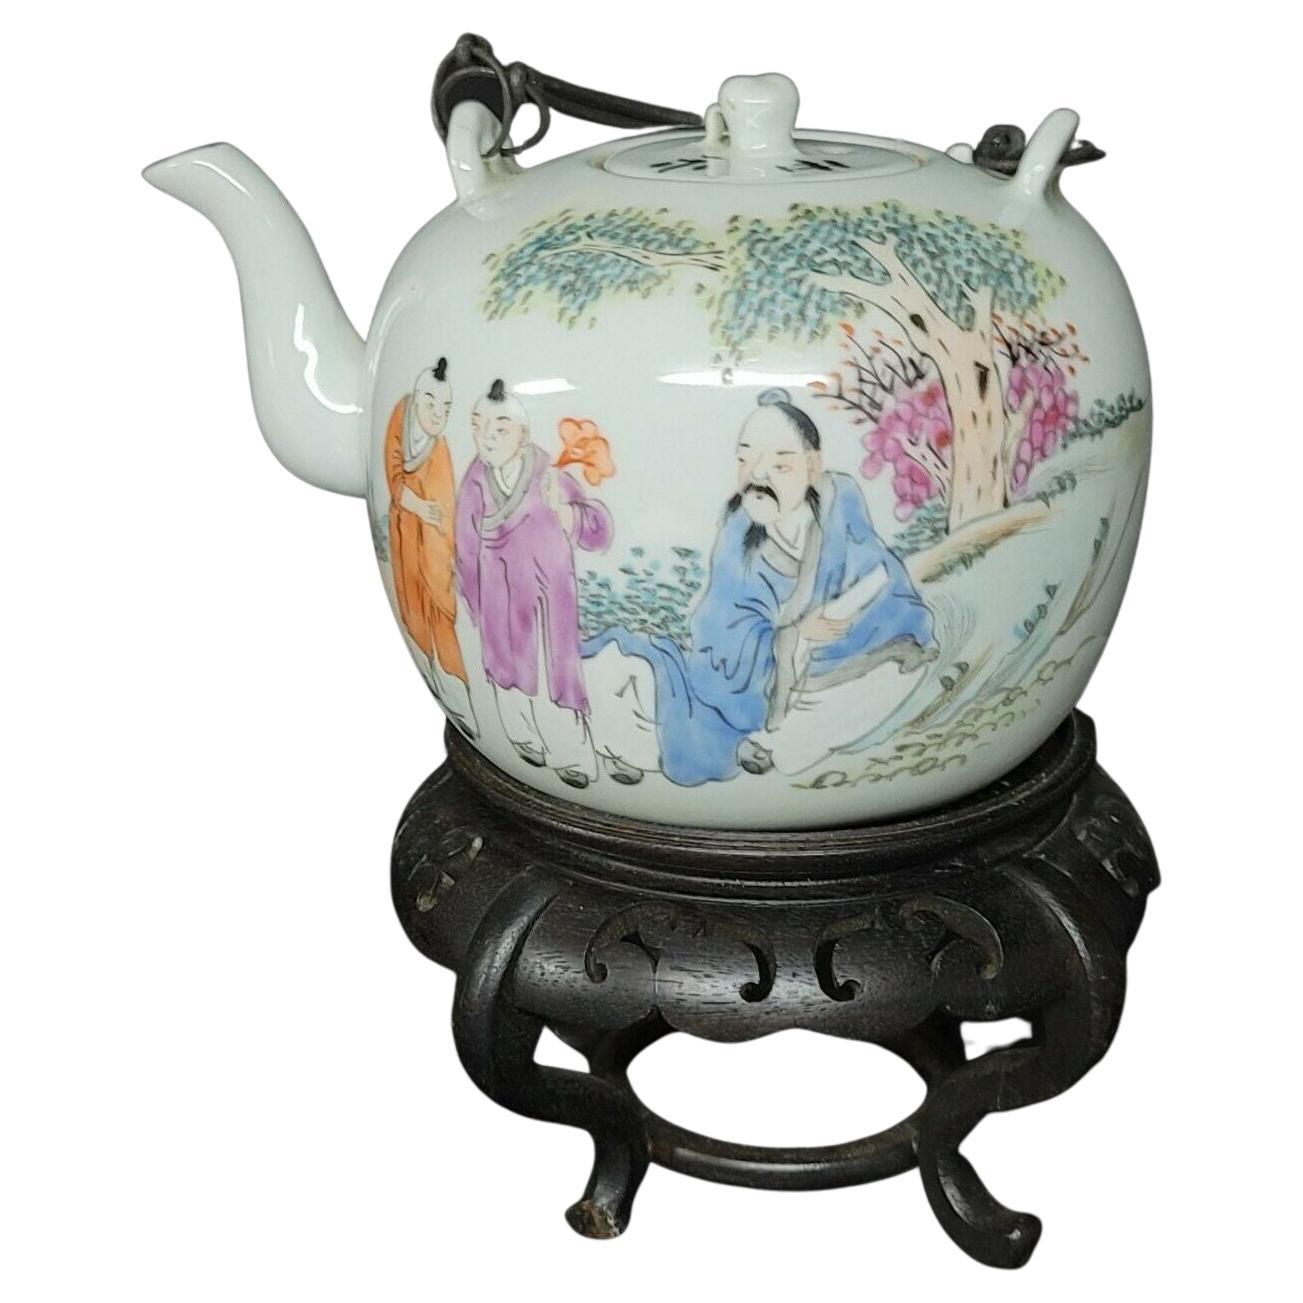 Antique Chinese Famille Rose Porcelain Teapot, 19th Century